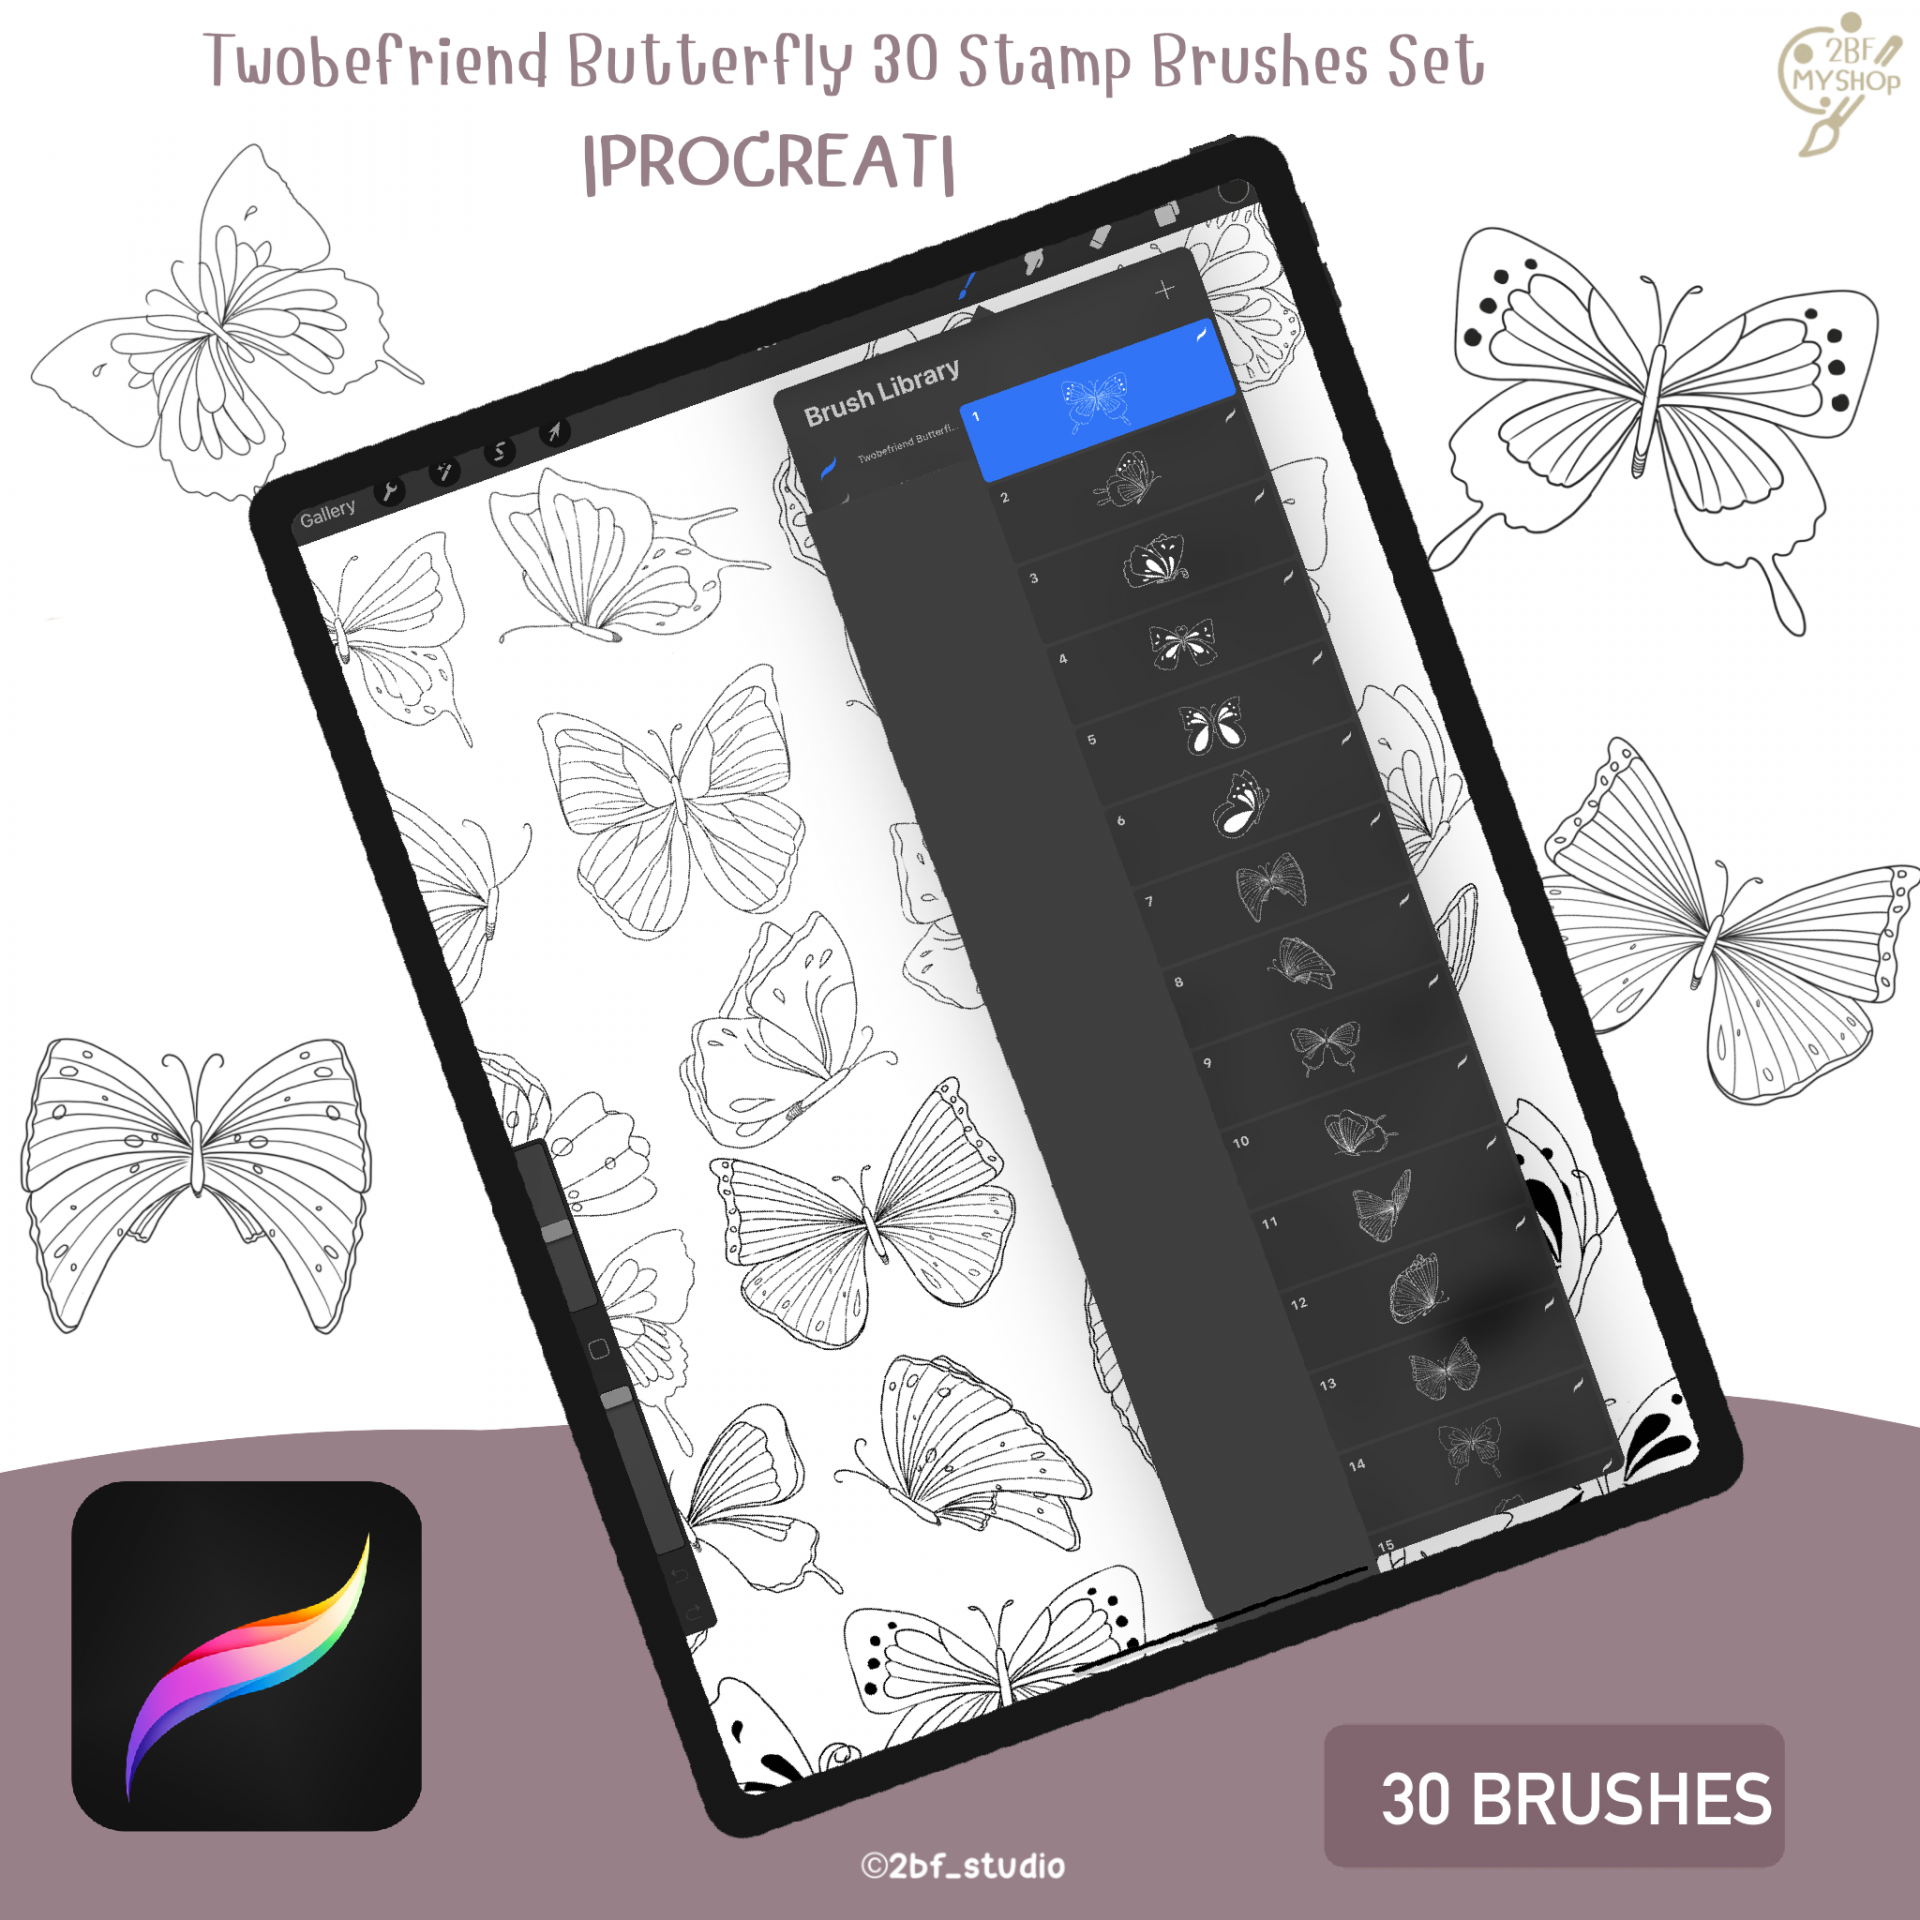 Twobefriend Butterfly 30 Stamp Brushes Set  |PROCREAT BRUSHED|